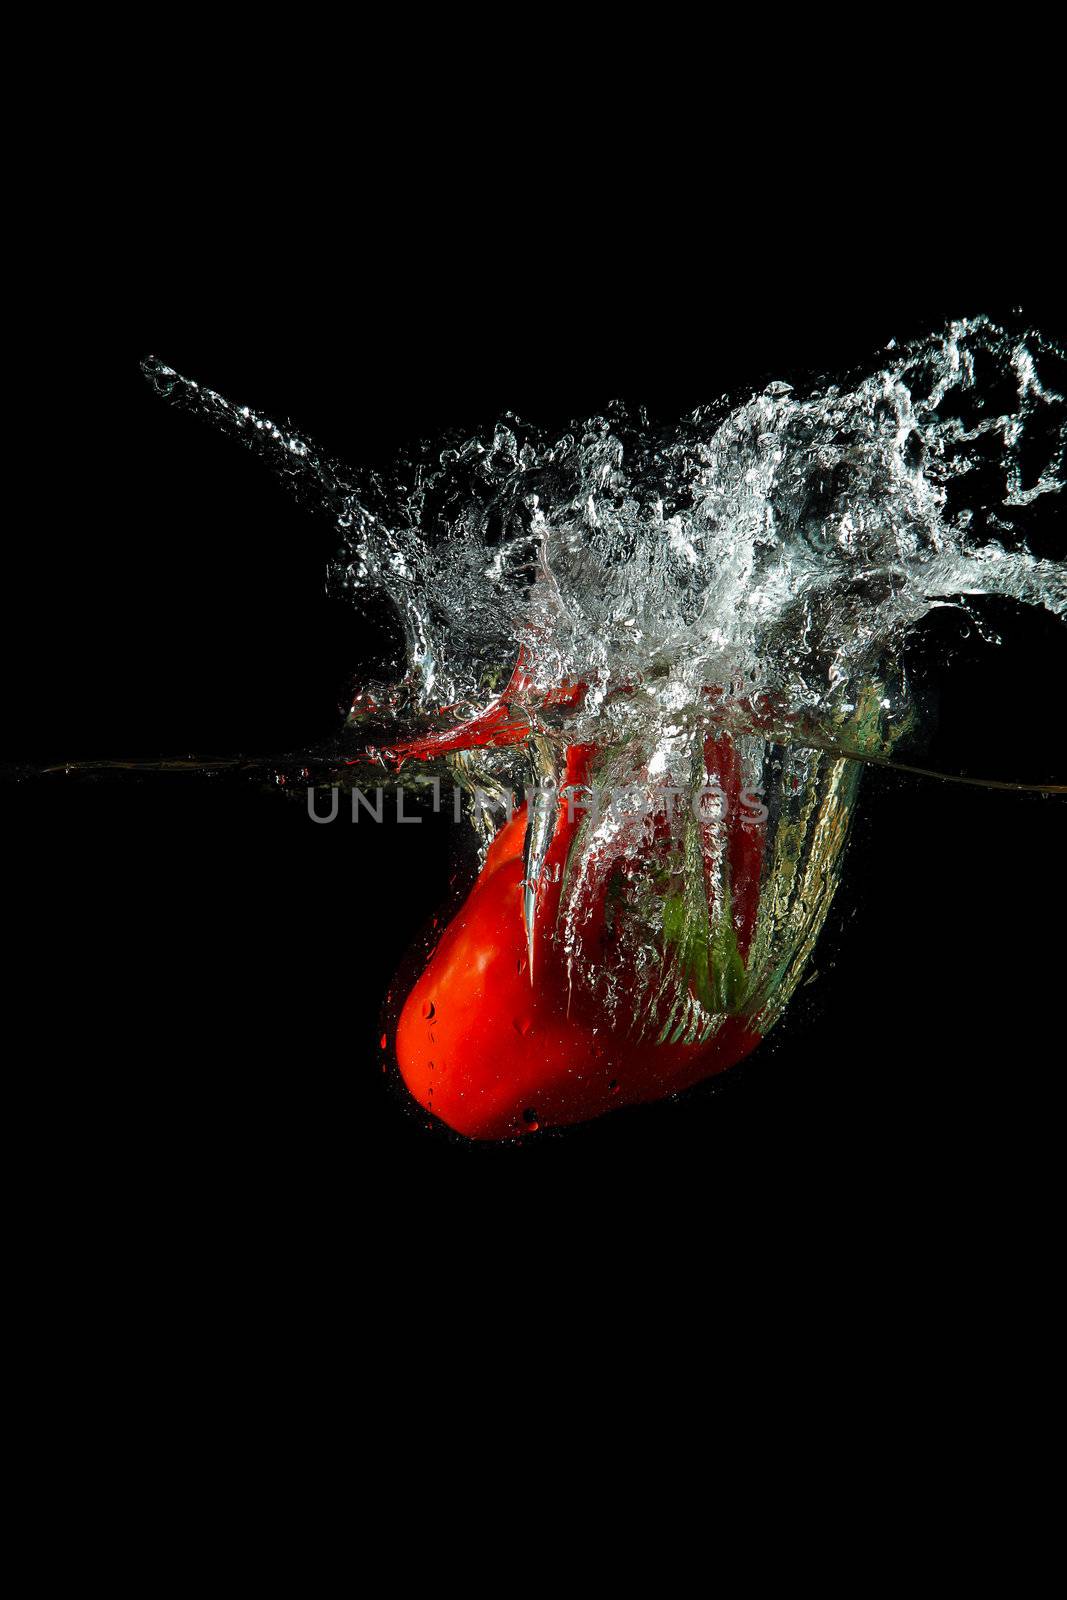 Colored red paprika in water splashes on black background